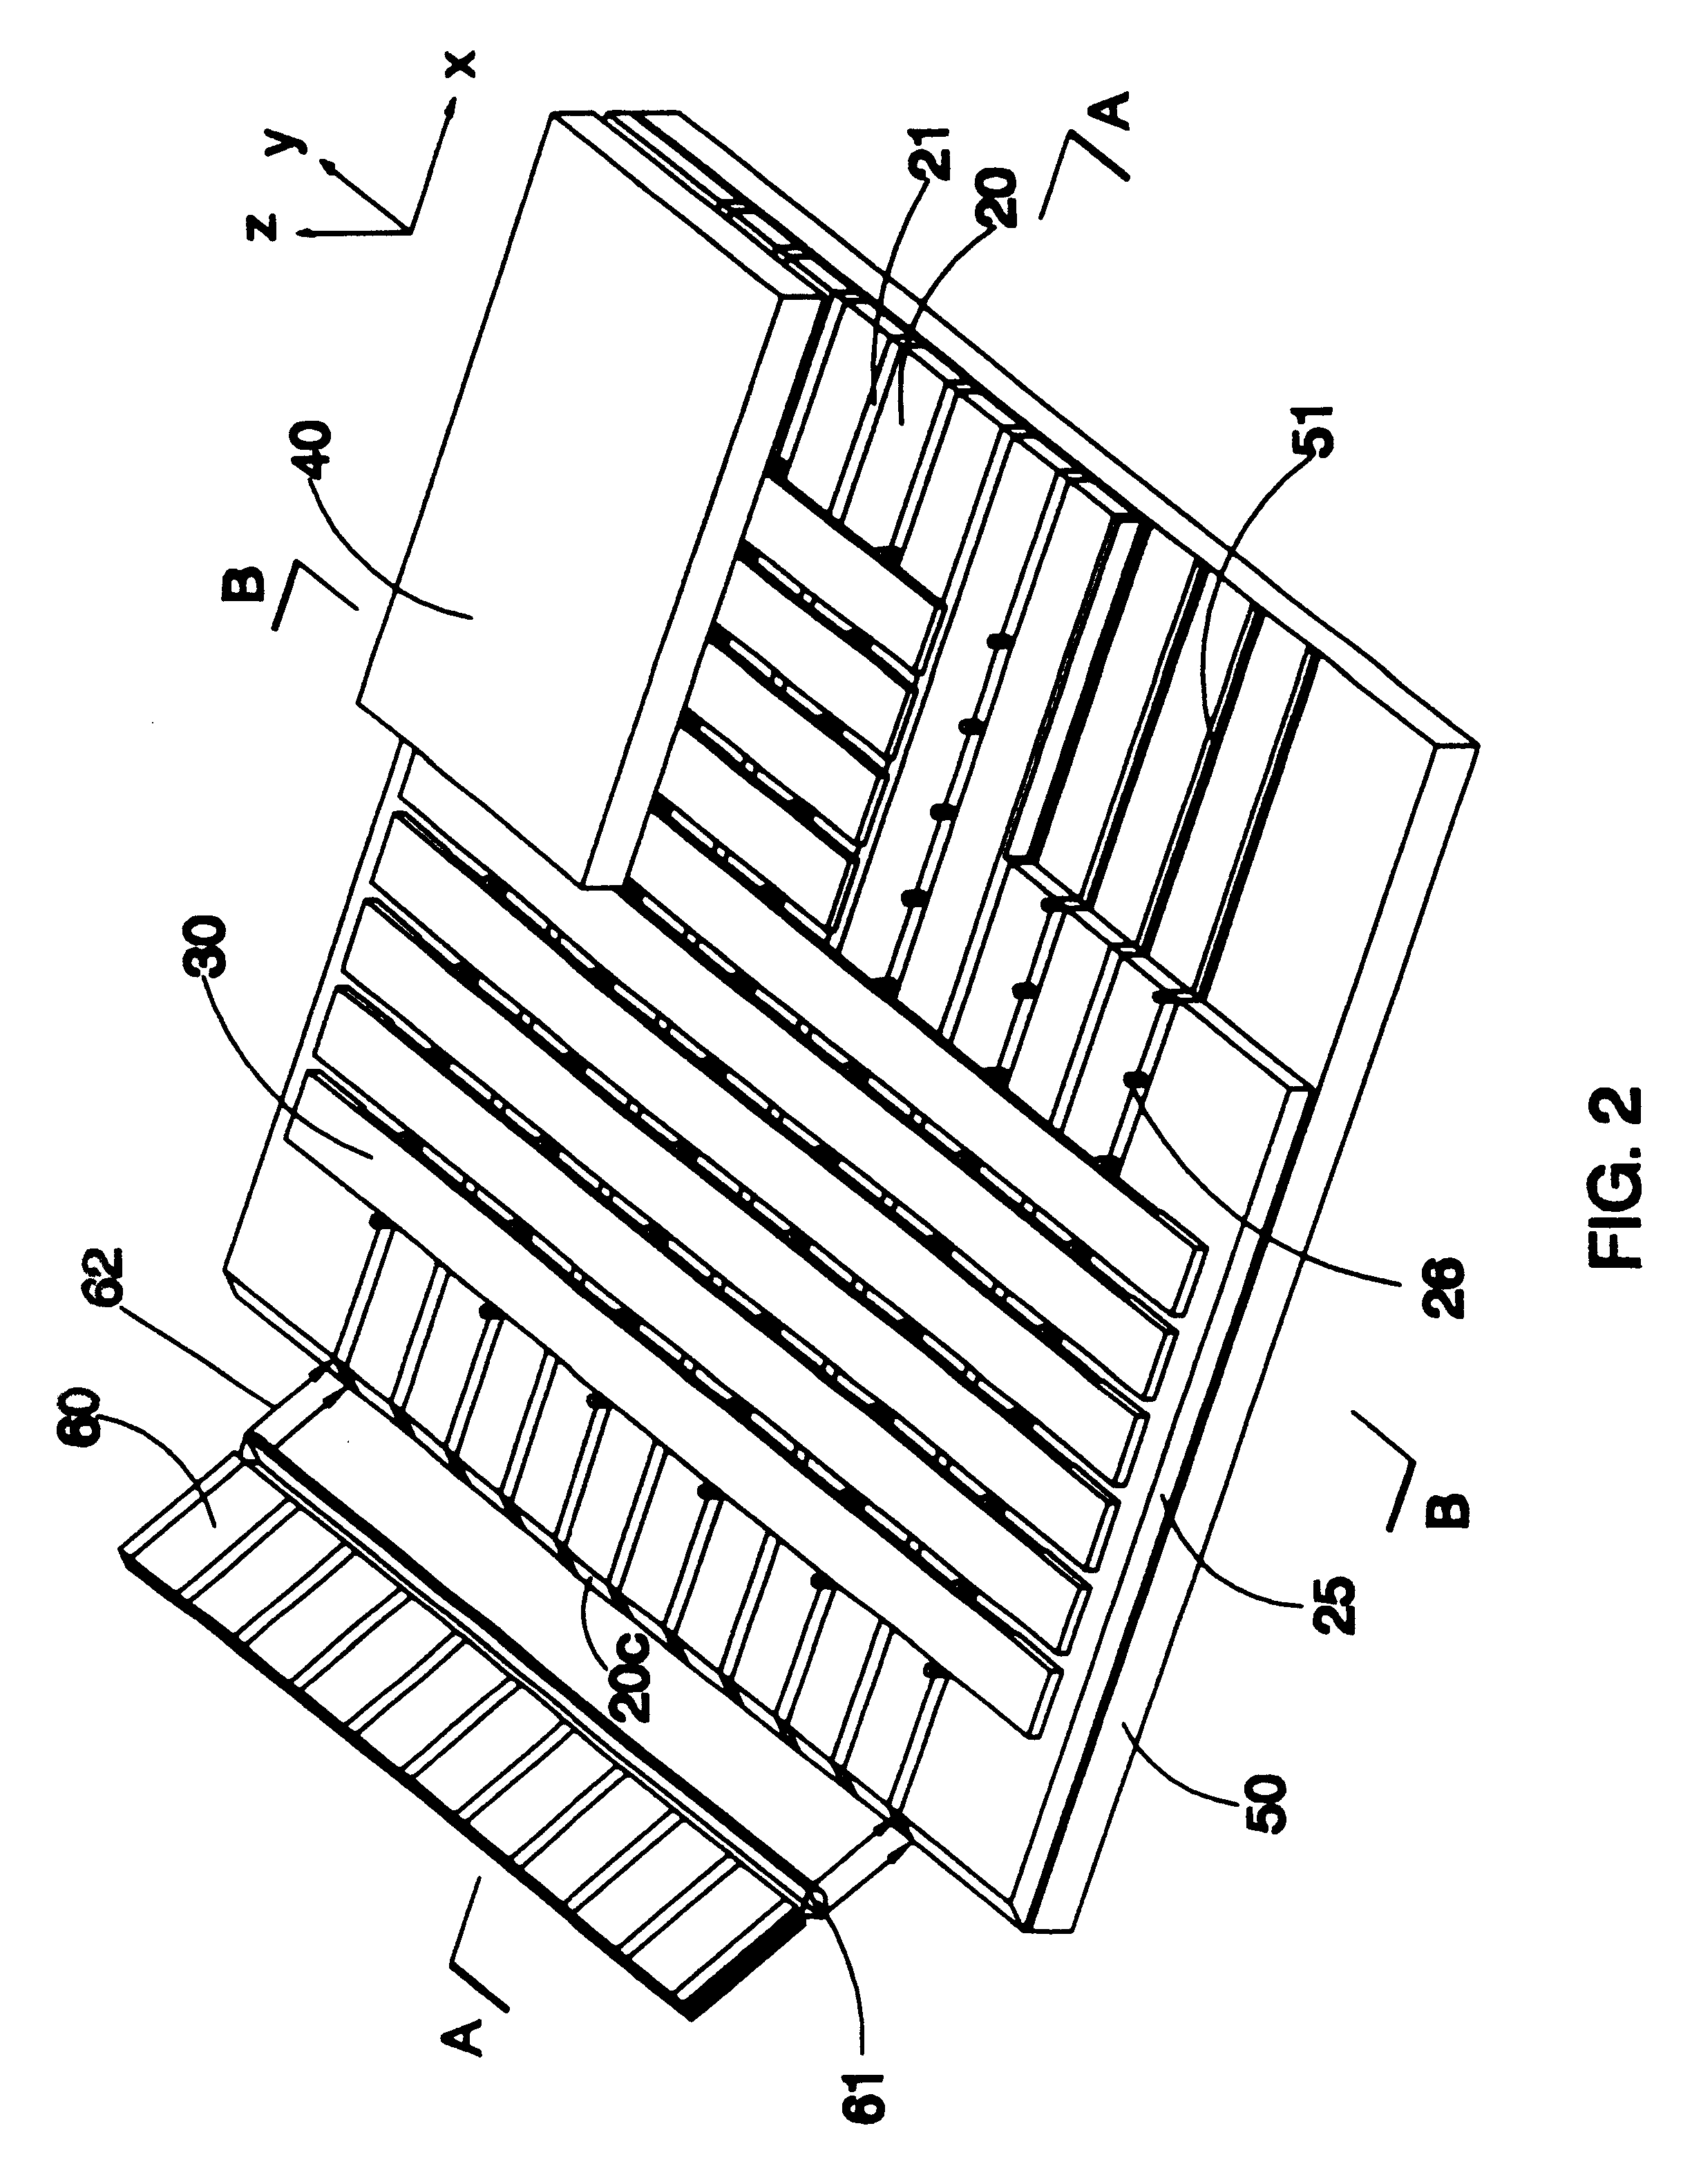 Optical device utilizing optical waveguides and mechanical light-switches